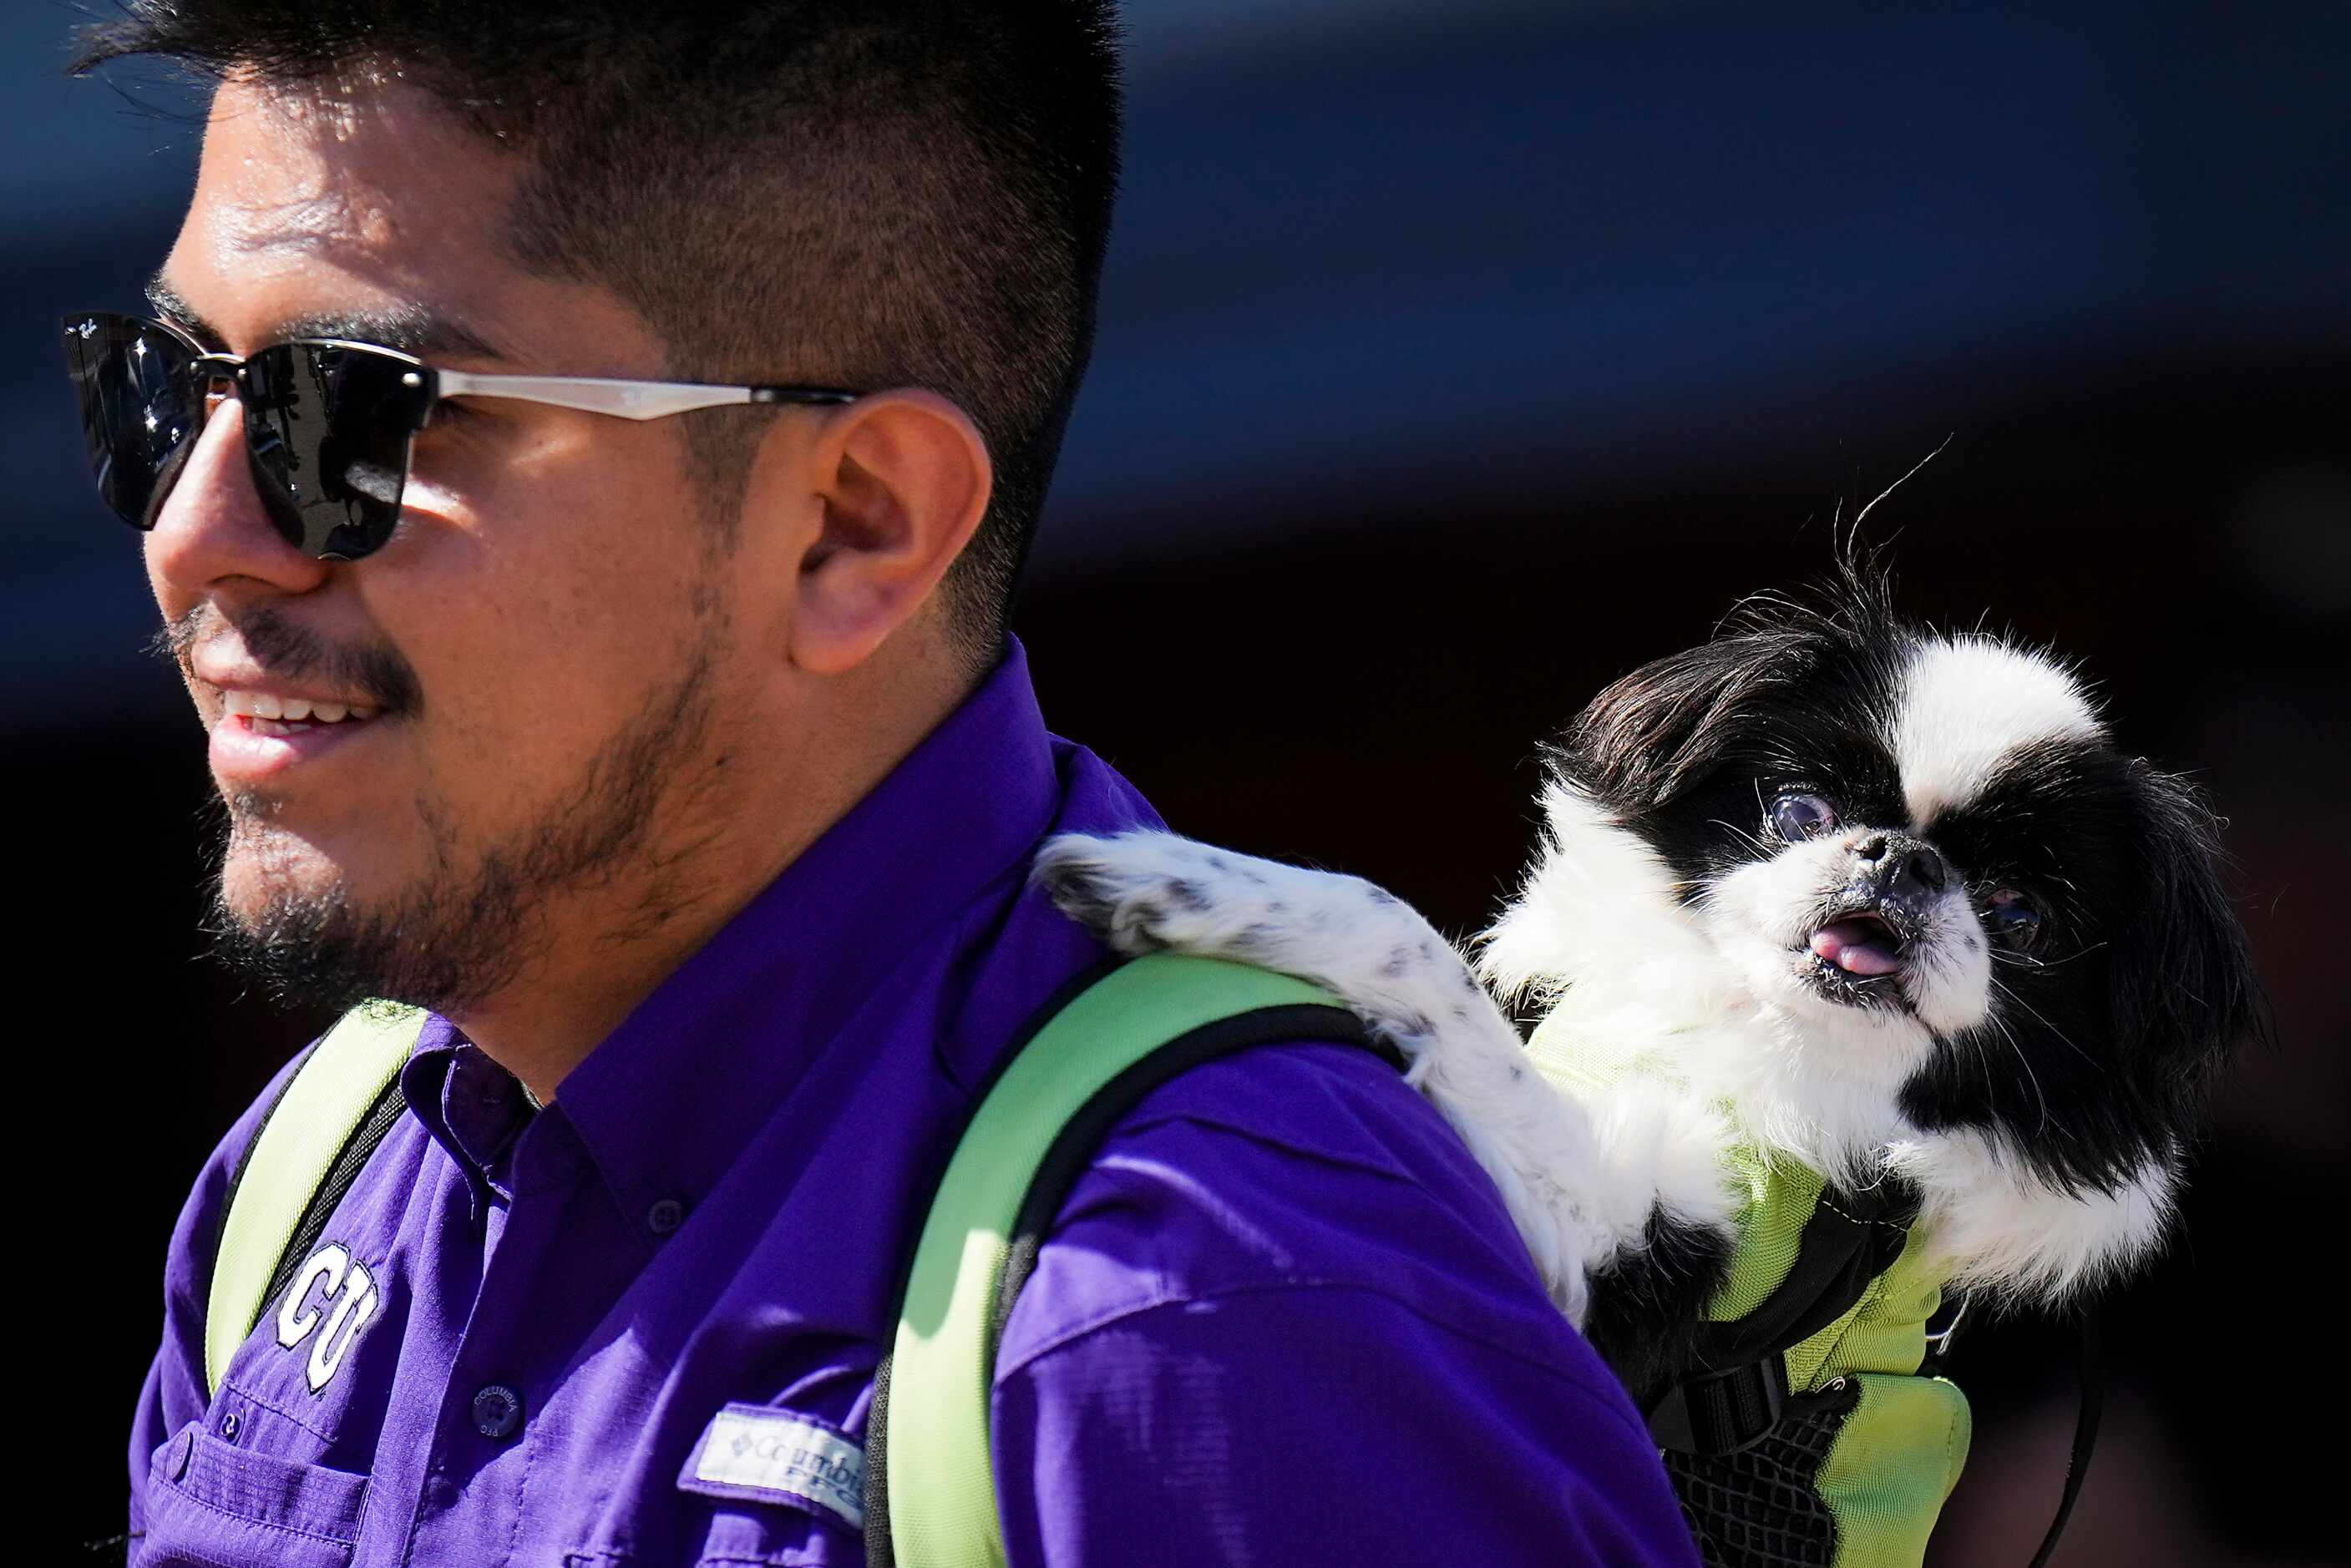 Daniel Castro carries his dog Jack in a backpack during the 214Selena celebration, honoring...